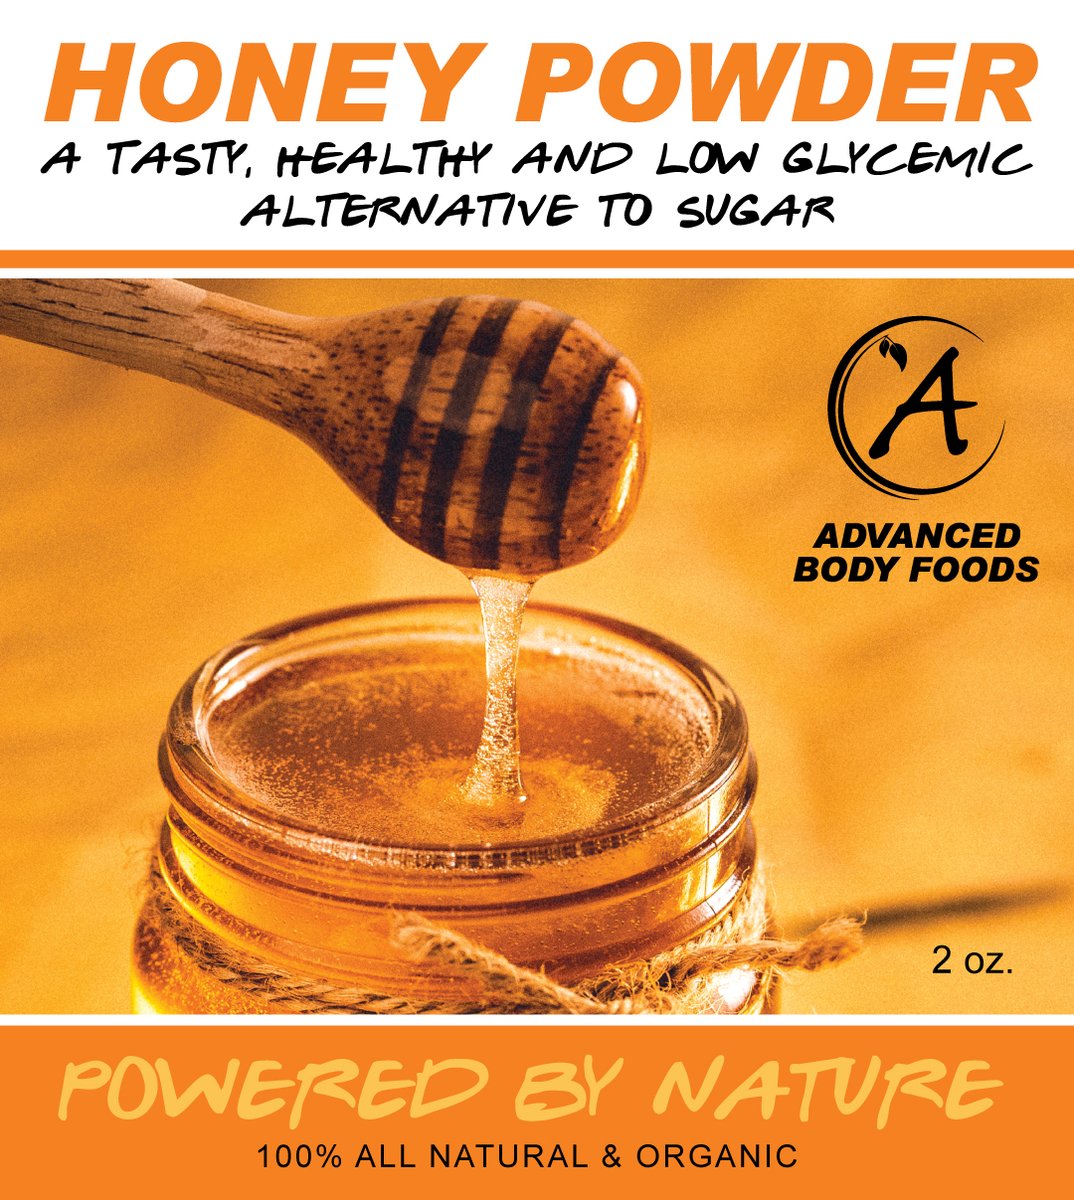 100% Condensed and Powdered Honey #HoneyPowder #newproducts #LowGlycemic #honey #honeybees #AdvancedBodyFoods #superfood #superfoodnutrition #flavorful A Great Tasting Low Glycemic Alternative To White #Sugar and Artificial Sweetners Indulge in the delicious sweetness of…